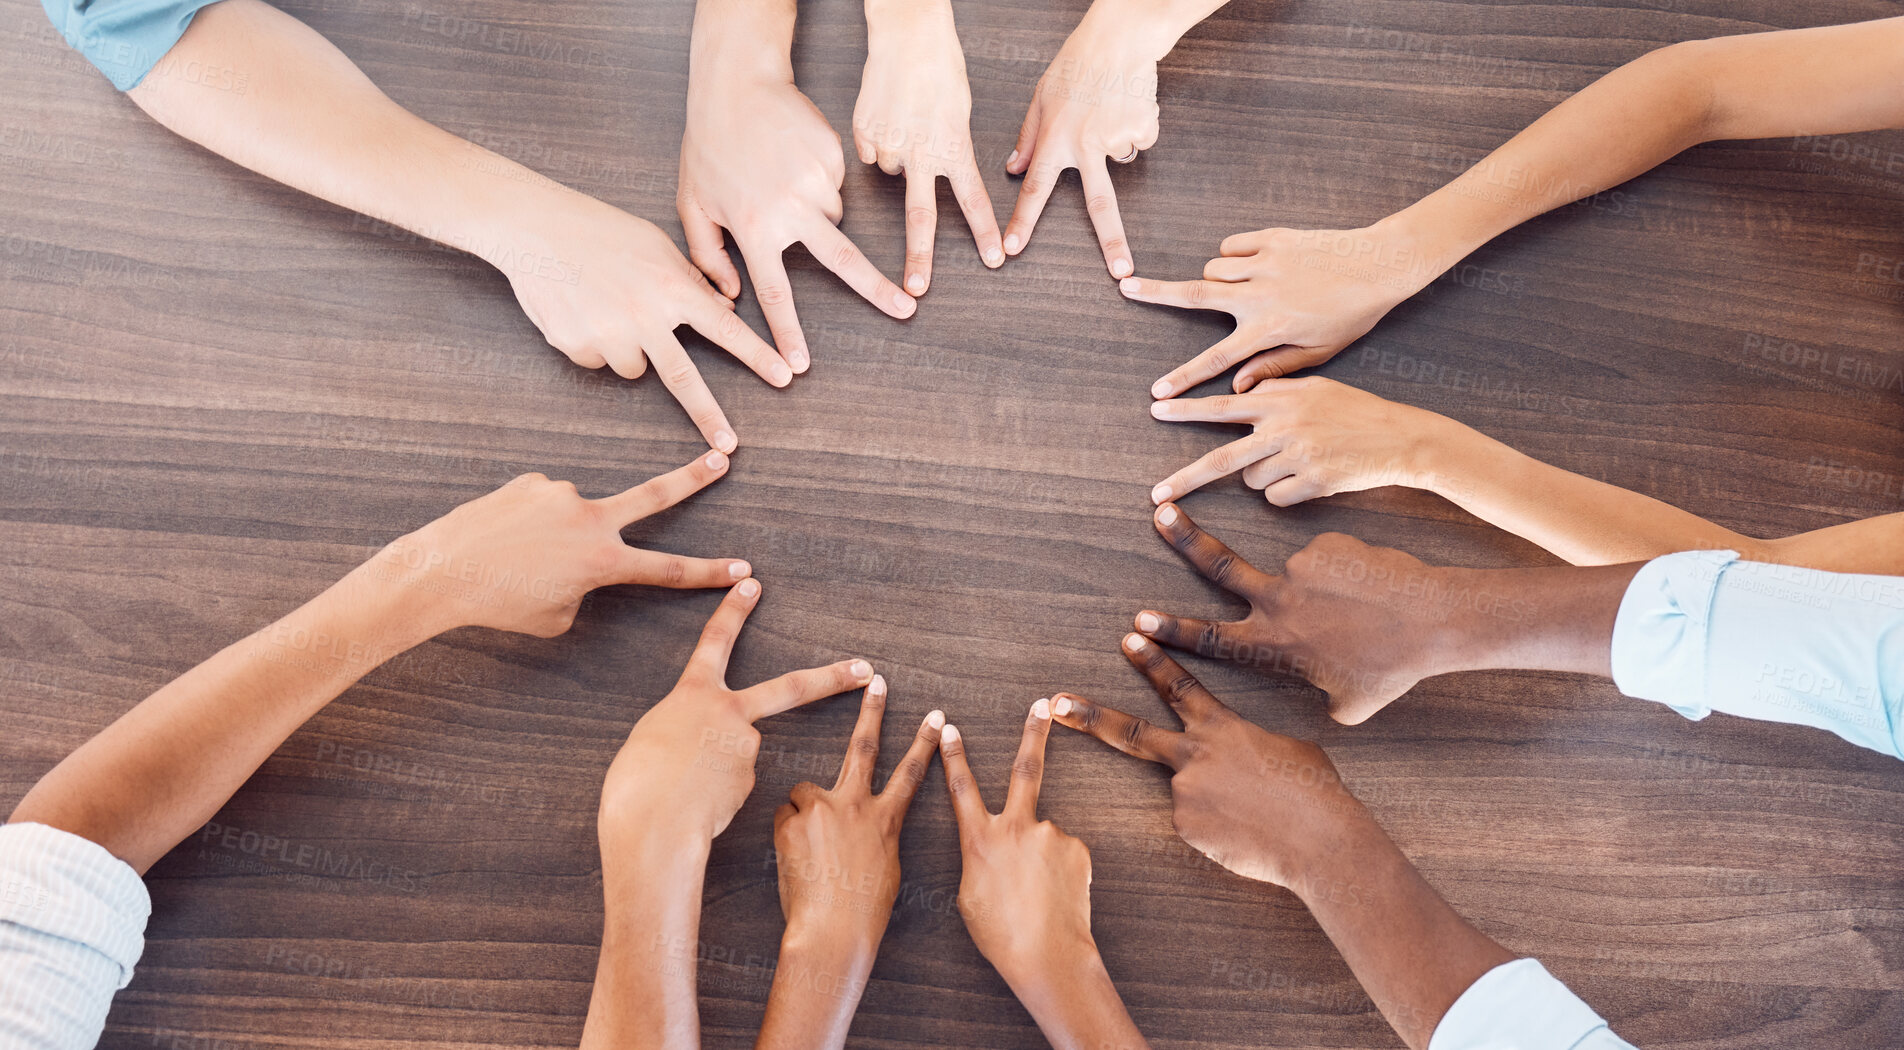 Buy stock photo Team, diversity and peace hand sign, team building and community in business and corporate support with solidarity. Group collaboration, business people and trust, company show teamwork in workforce.